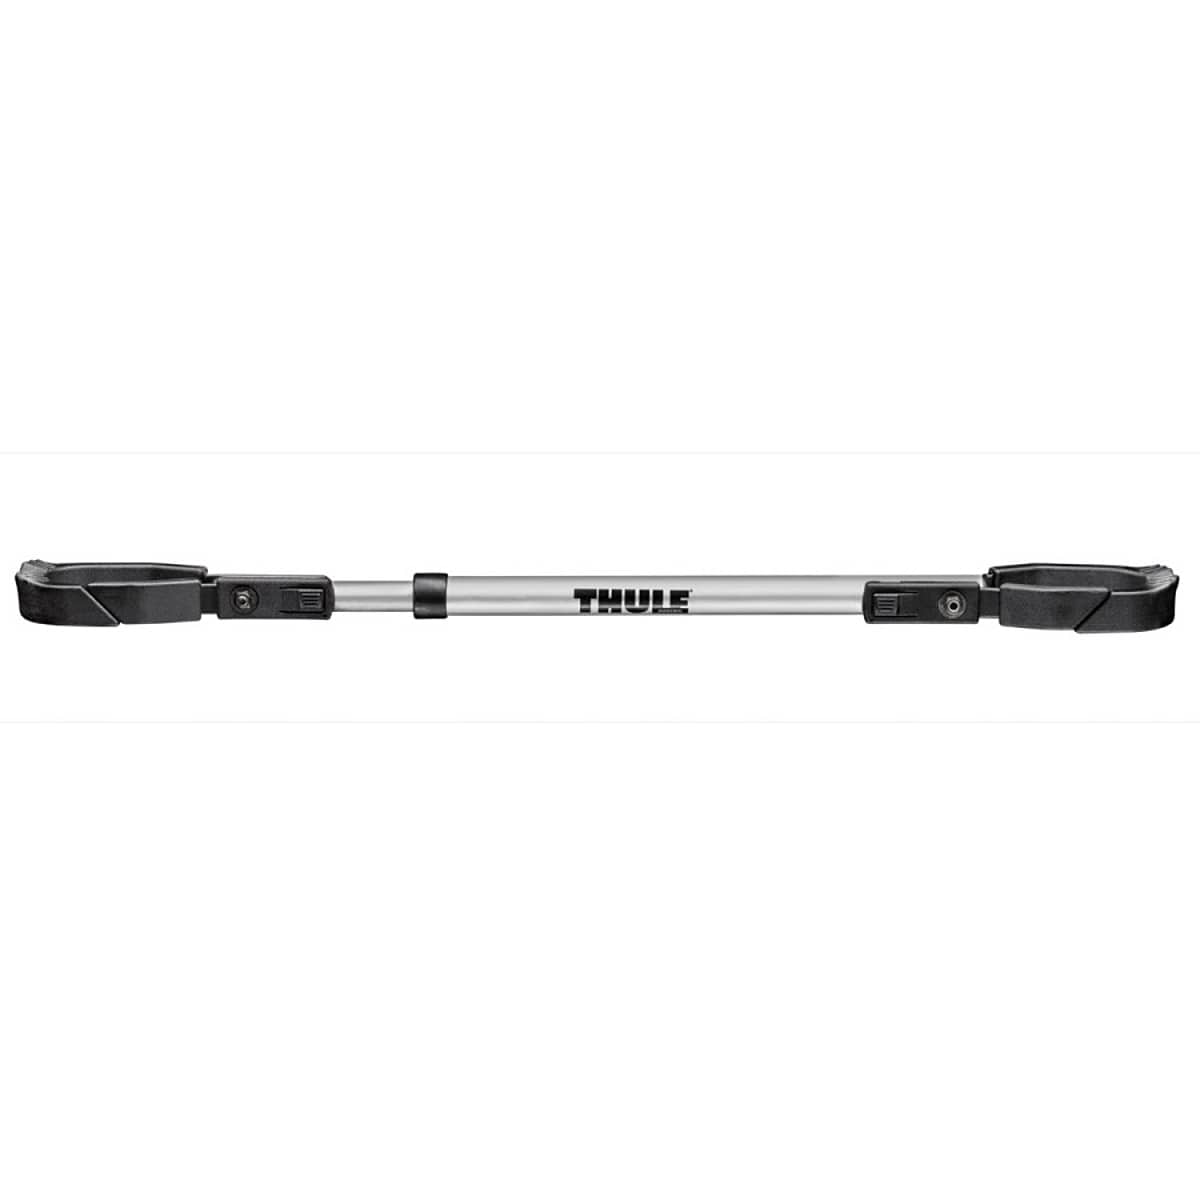 Thule Frame Adapter For Strap/Hitch Carriers